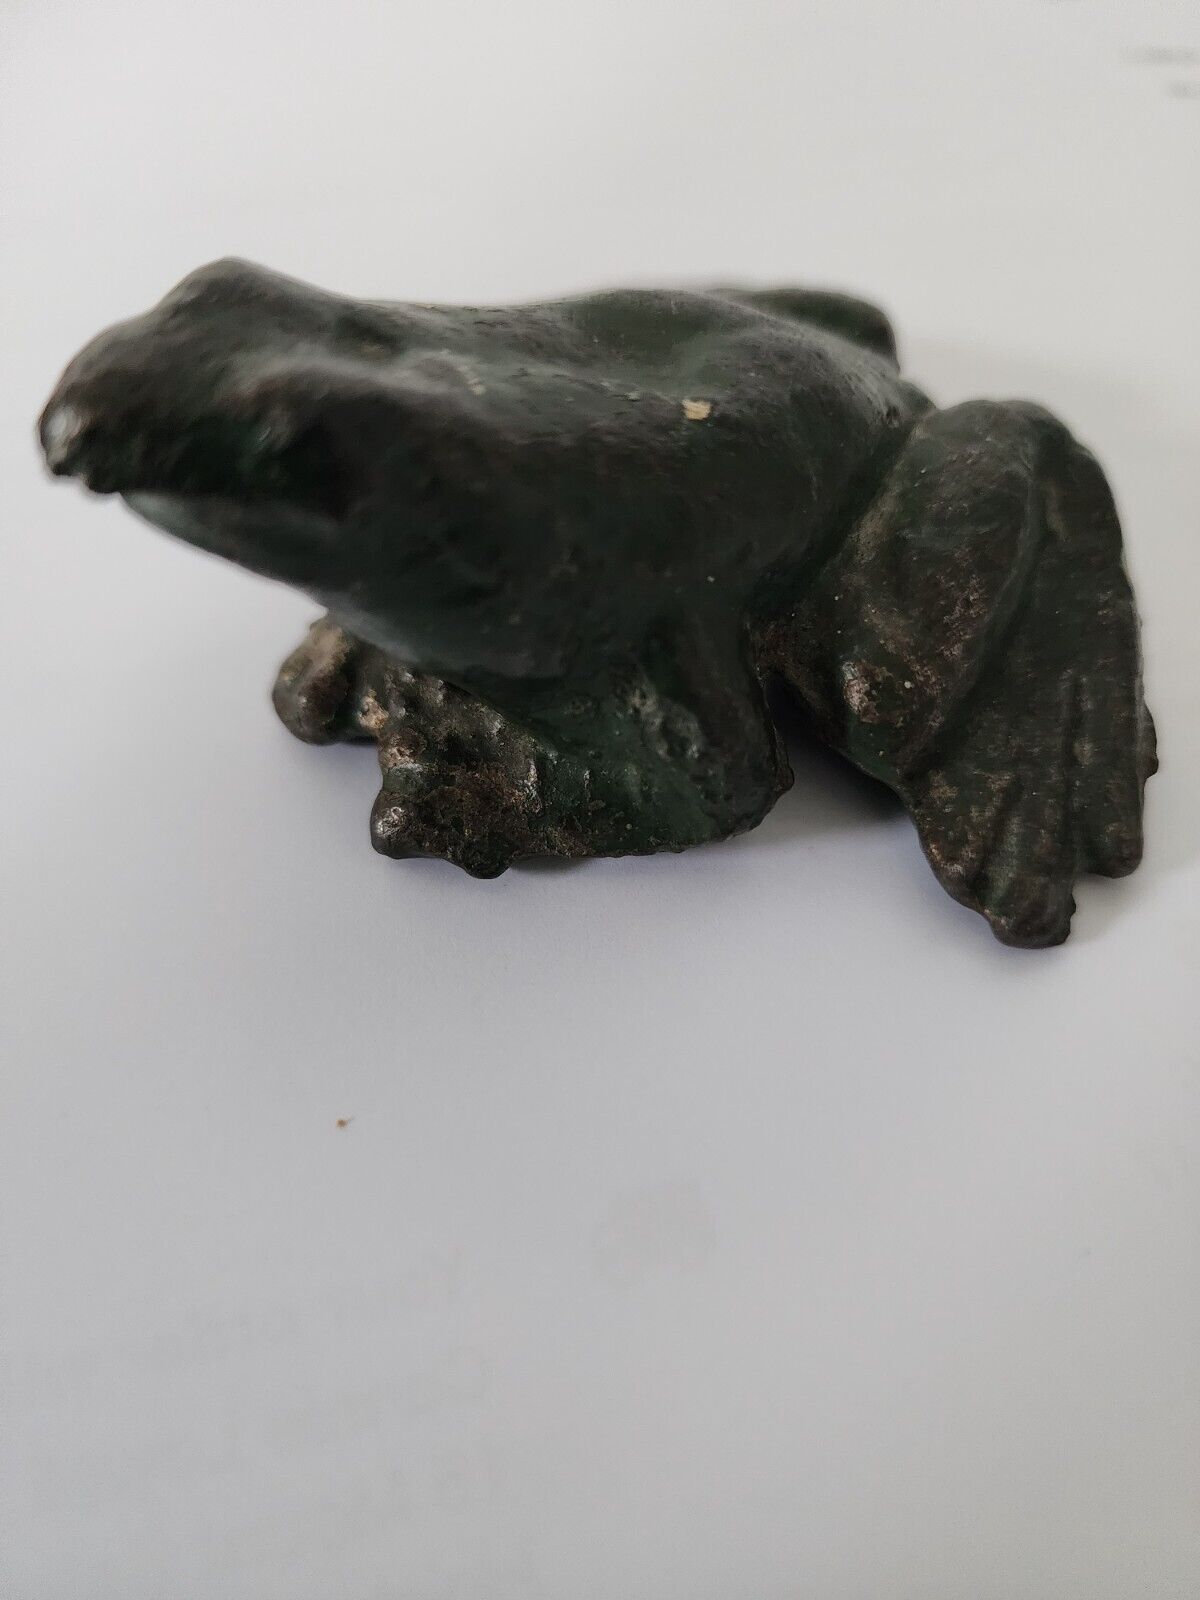 Vintage cast iron frog weight or pond / potted plant ornament